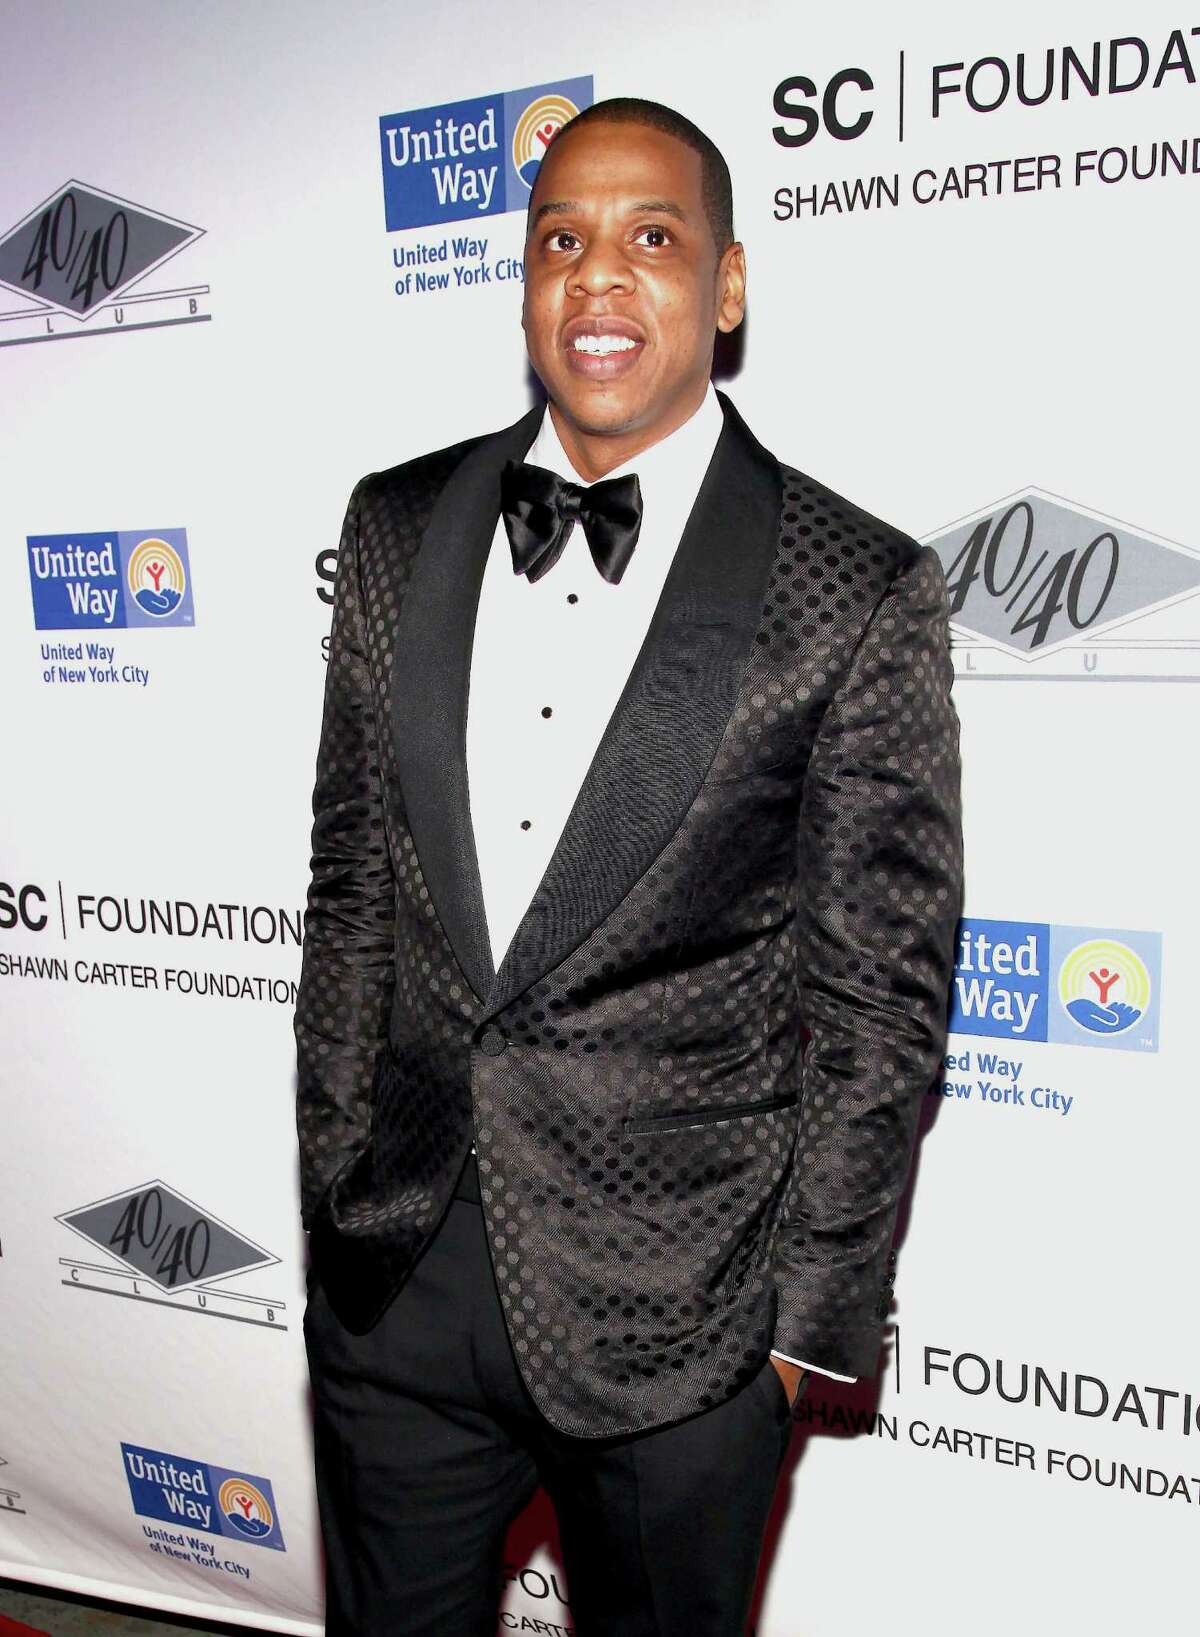 Jay-Z shares his Democratic views through his music.